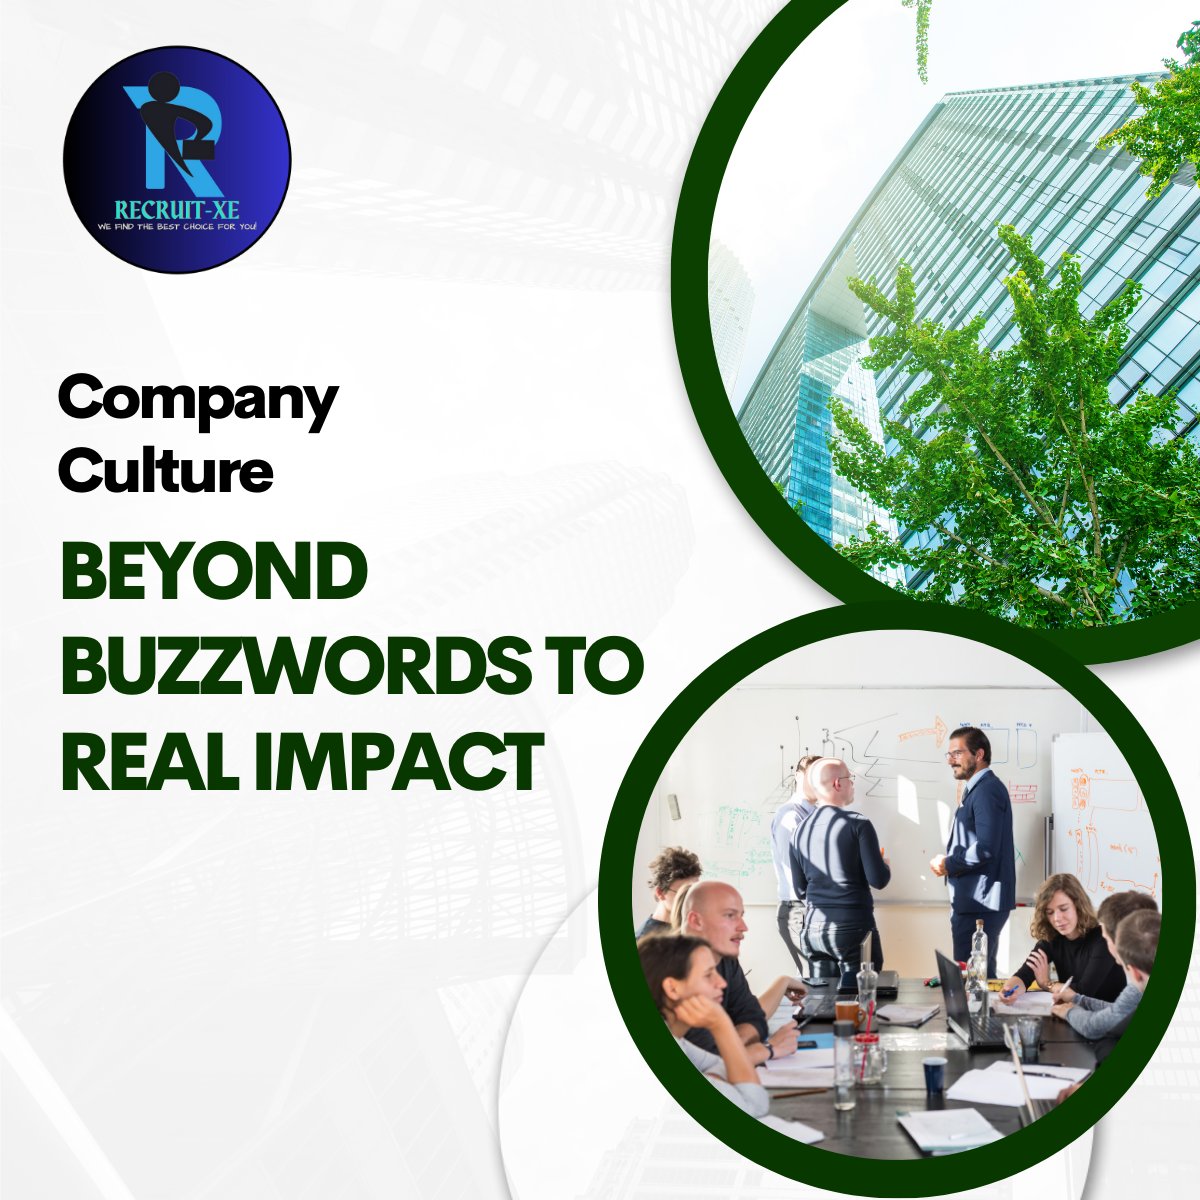 Company culture goes beyond slogans; it's a reflection of the collective values, behaviors, and experiences of your team. #CompanyCulture #CulturalValues #DiversityAndInclusion #EmployeeEngagement #OrganizationalImpact